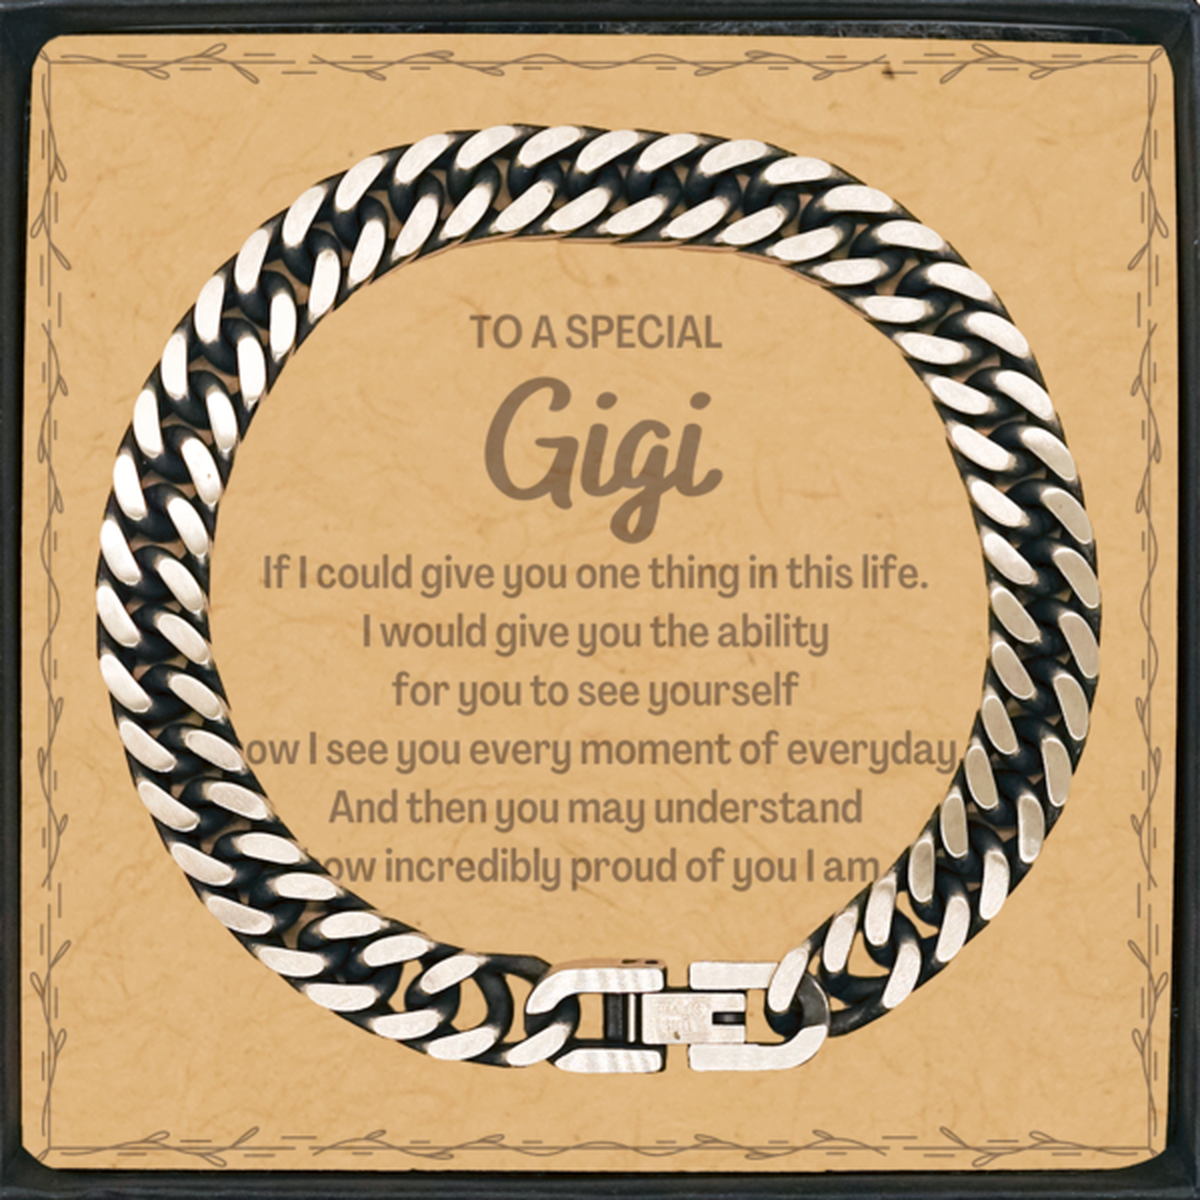 To My Gigi Cuban Link Chain Bracelet, Gifts For Gigi Message Card, Inspirational Gifts for Christmas Birthday, Epic Gifts for Gigi To A Special Gigi how incredibly proud of you I am